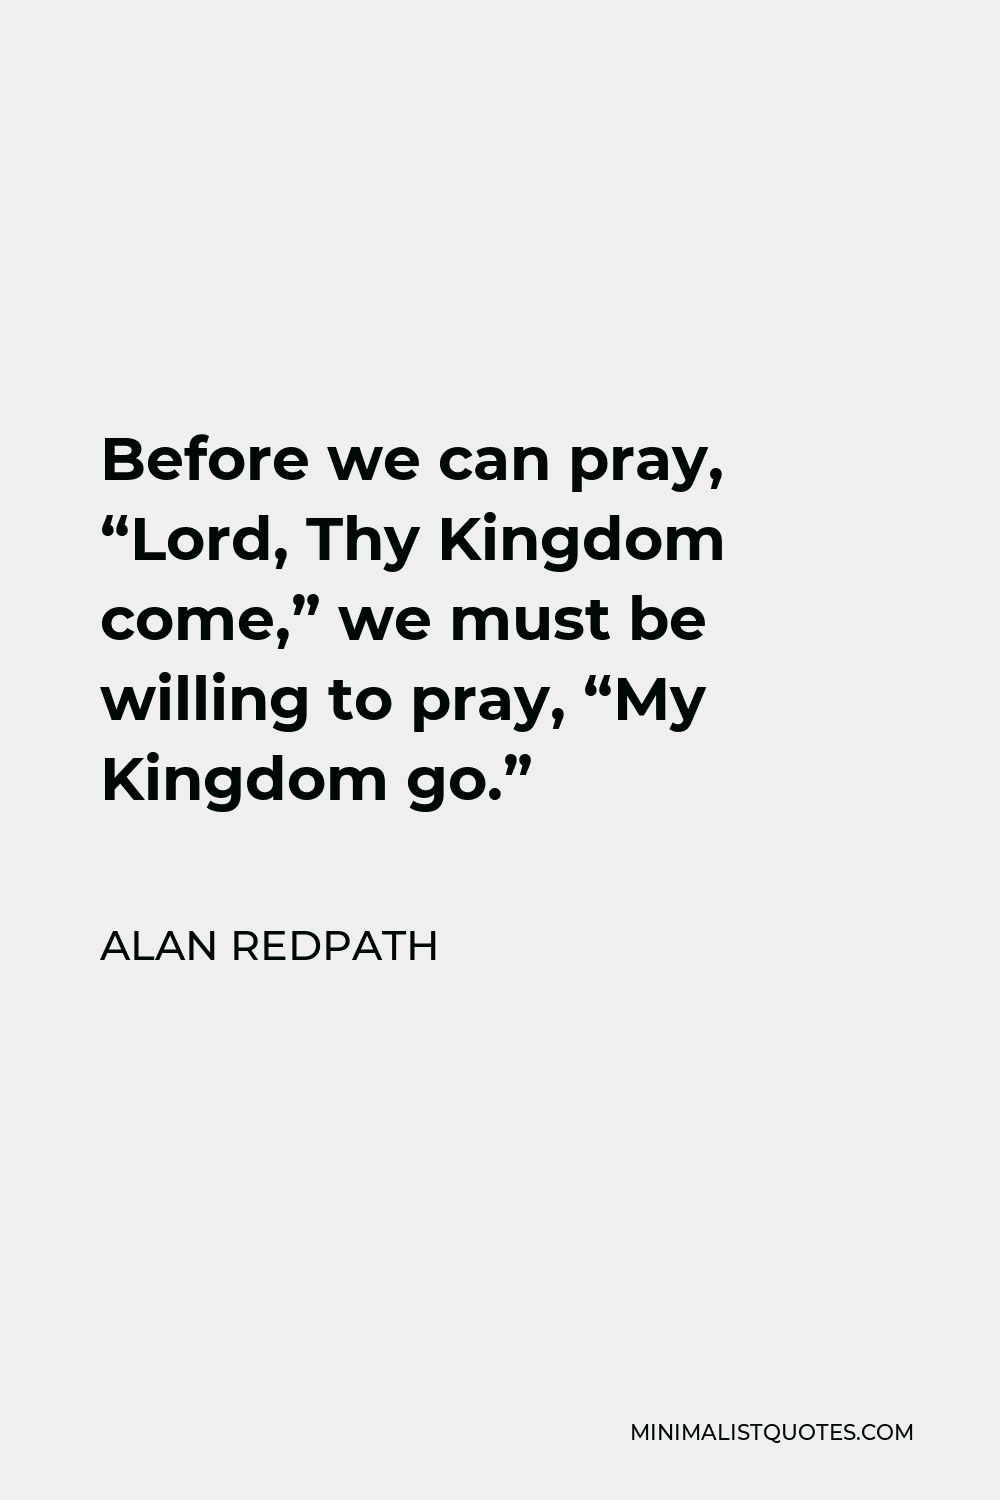 Alan Redpath Quote - Before we can pray, “Lord, Thy Kingdom come,” we must be willing to pray, “My Kingdom go.”